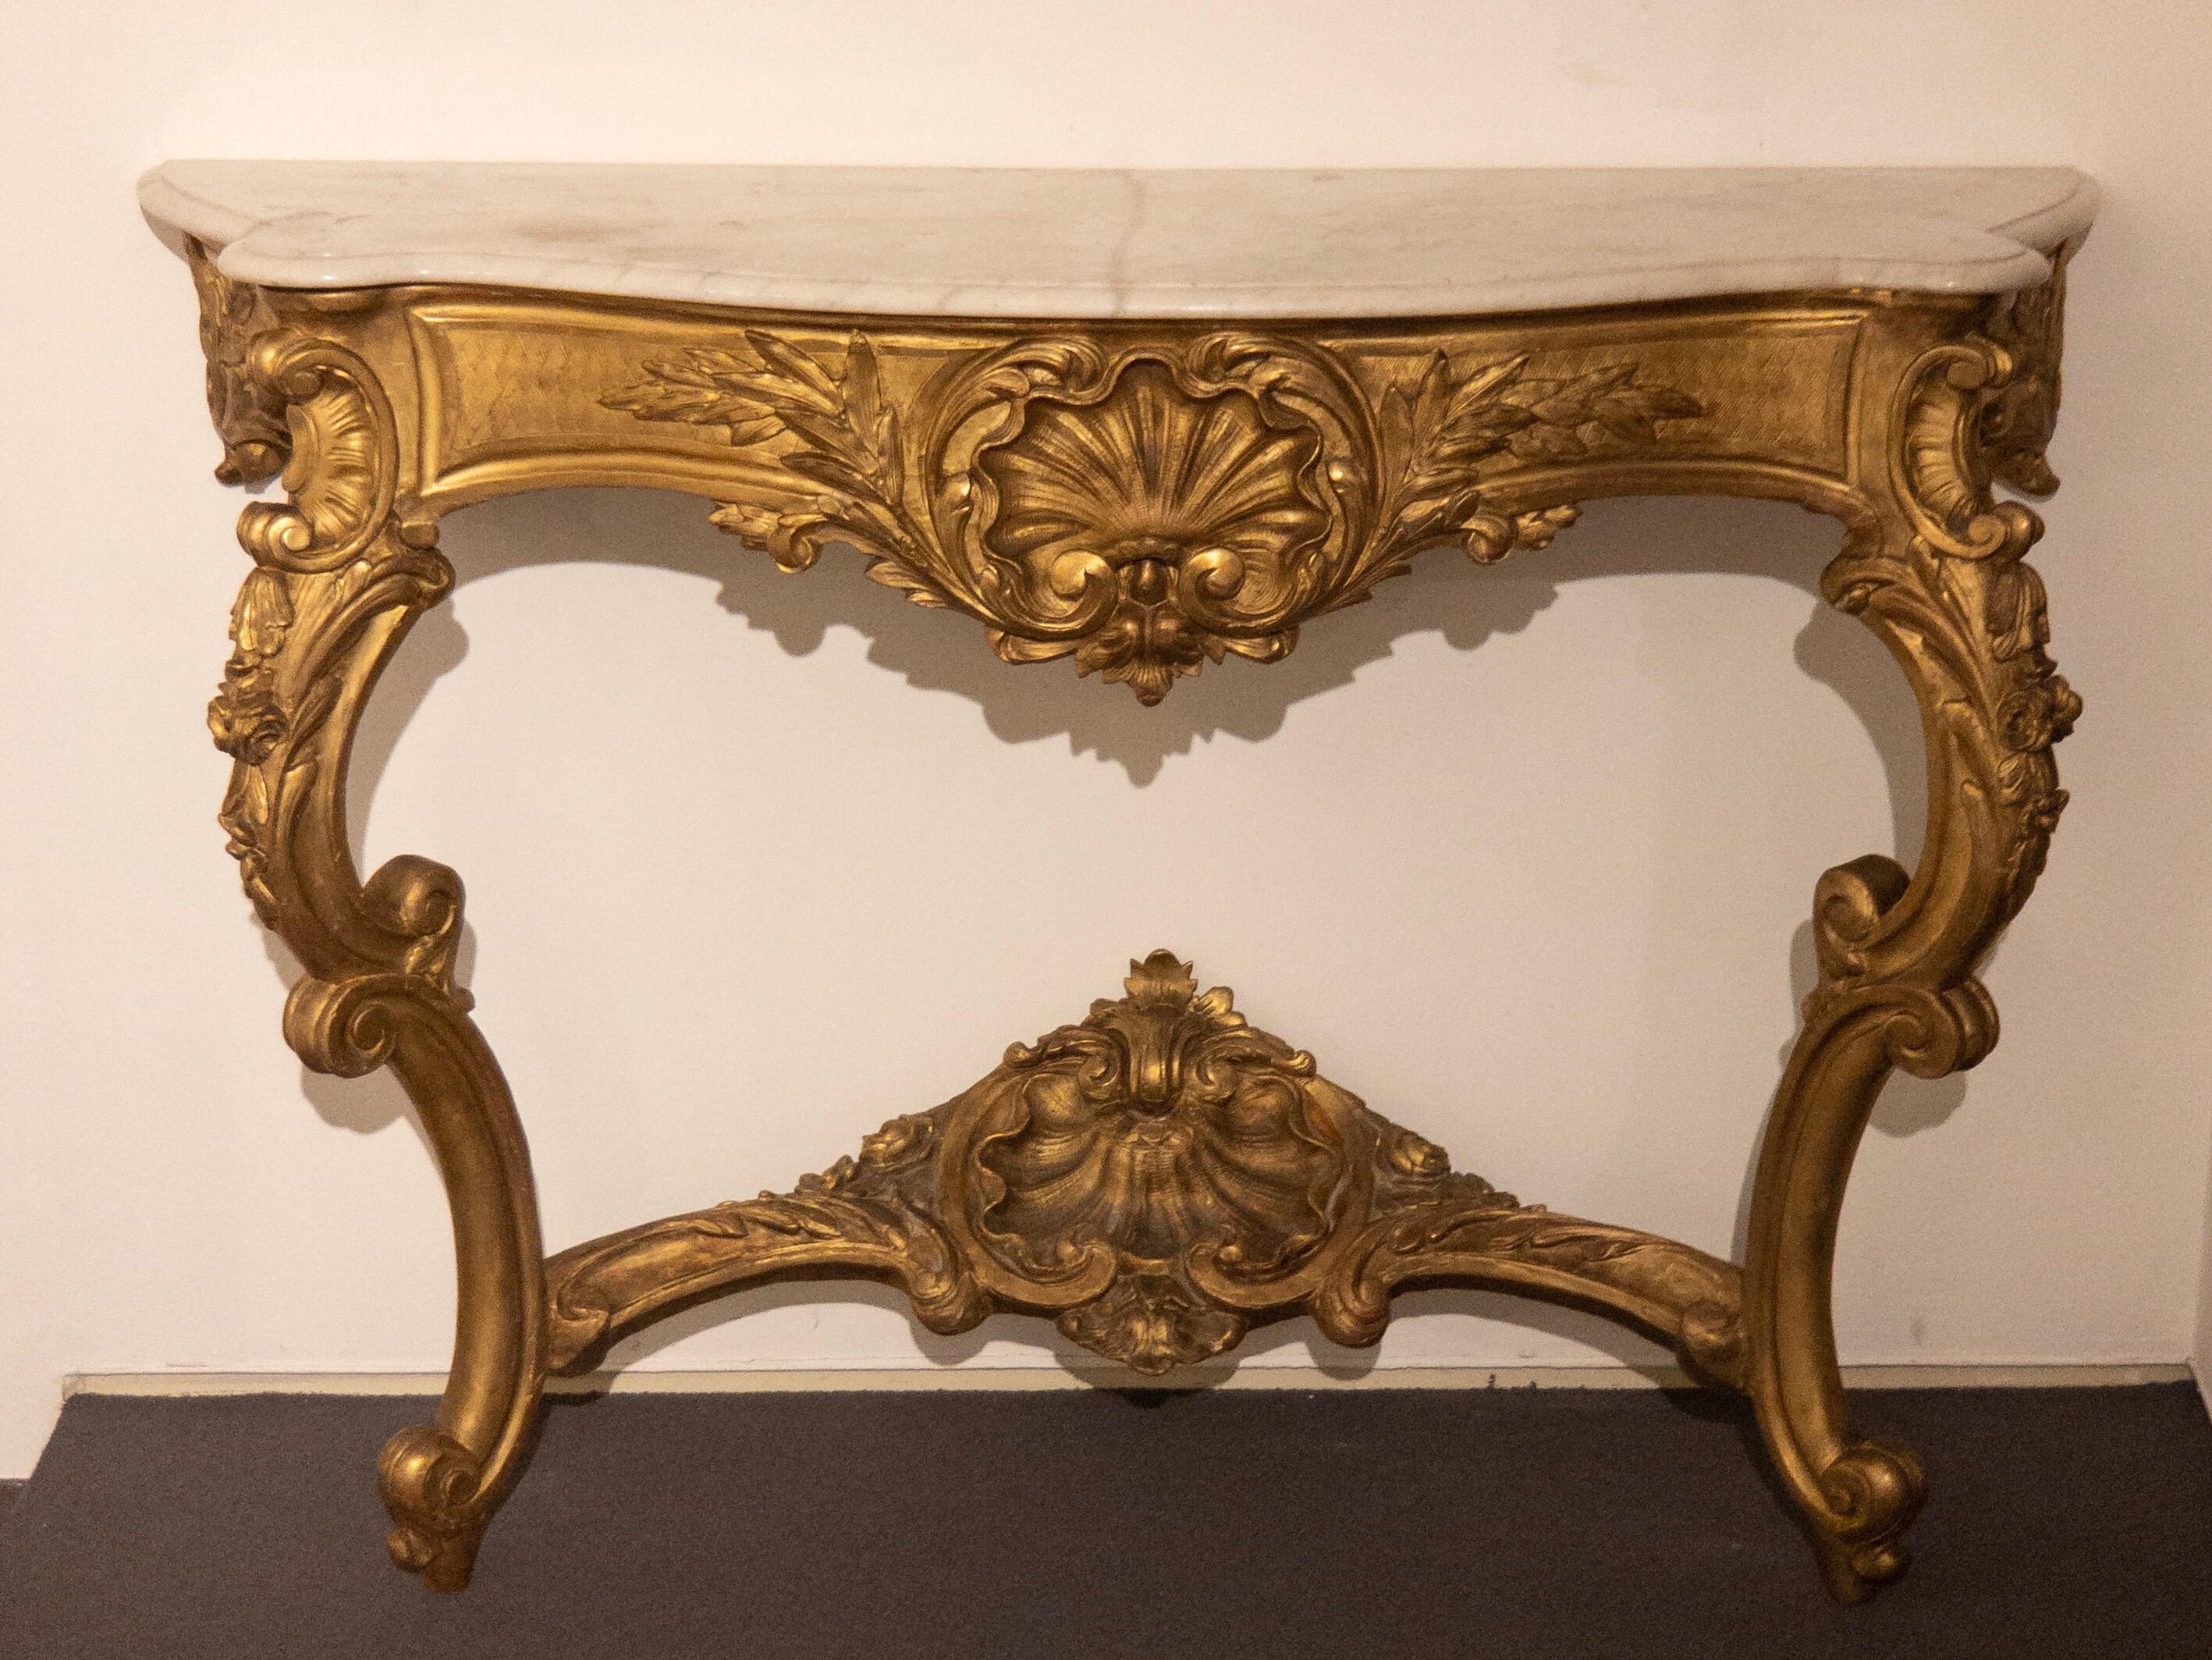 Wonderful antique Baroque console table from the late 18th or early 19th century. The gilded console table was manufactured in France and has a white/grey grained marble top. 

Dimensions:
W 53.937 in. / D 17.717 in. / H 38.583 in. 
W 137 cm / D